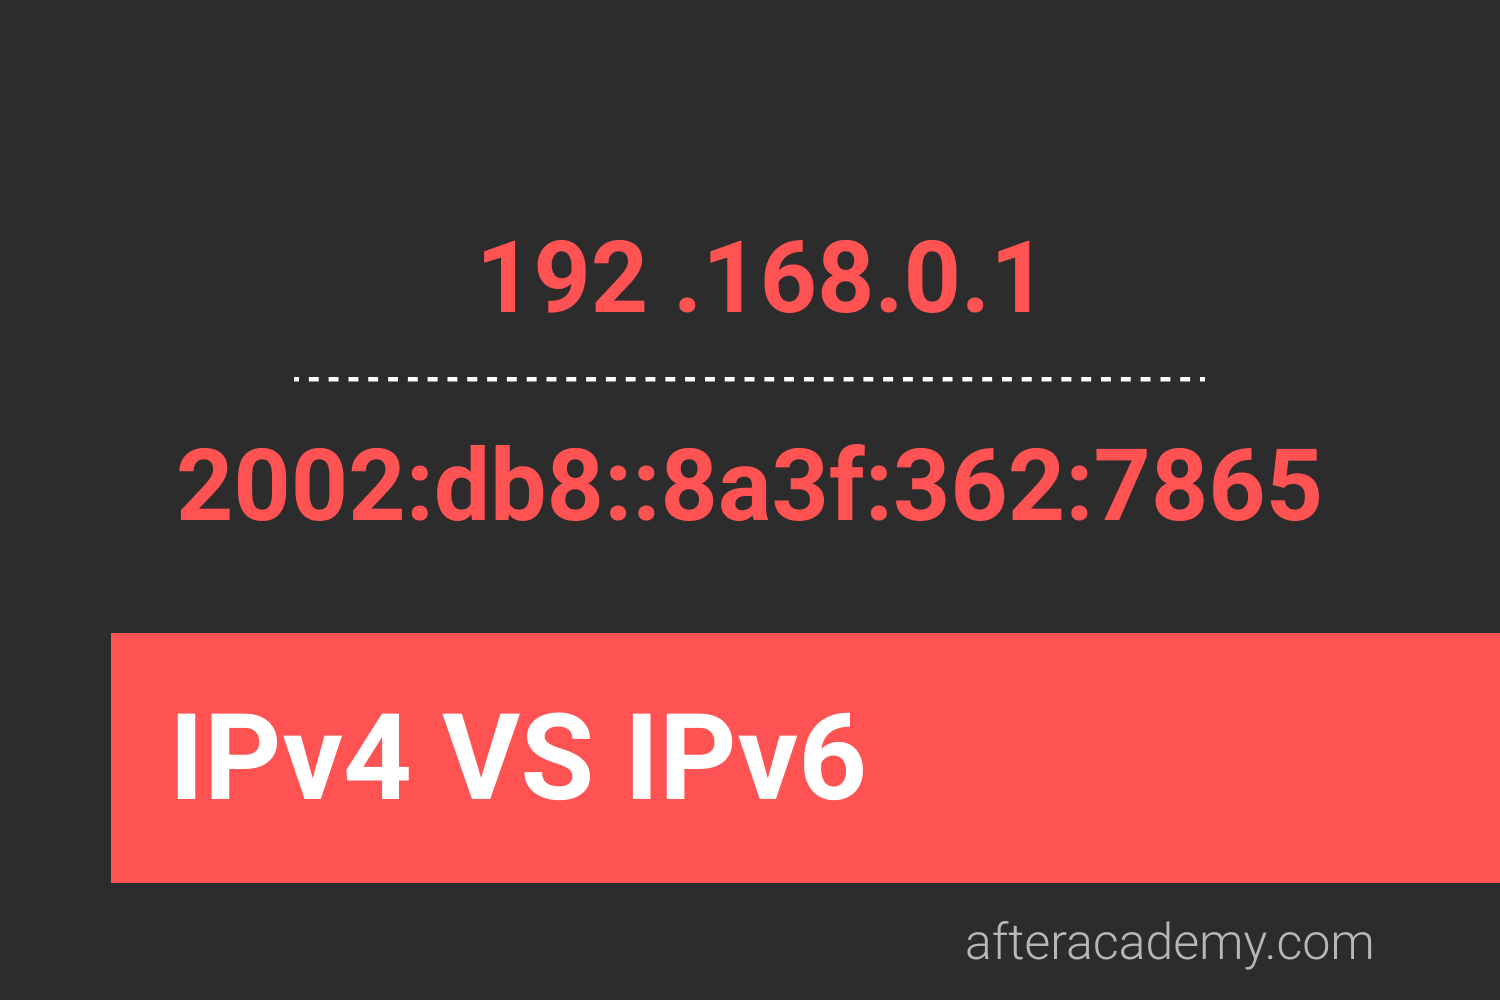 what are the advantages of ipv6 over ipv4